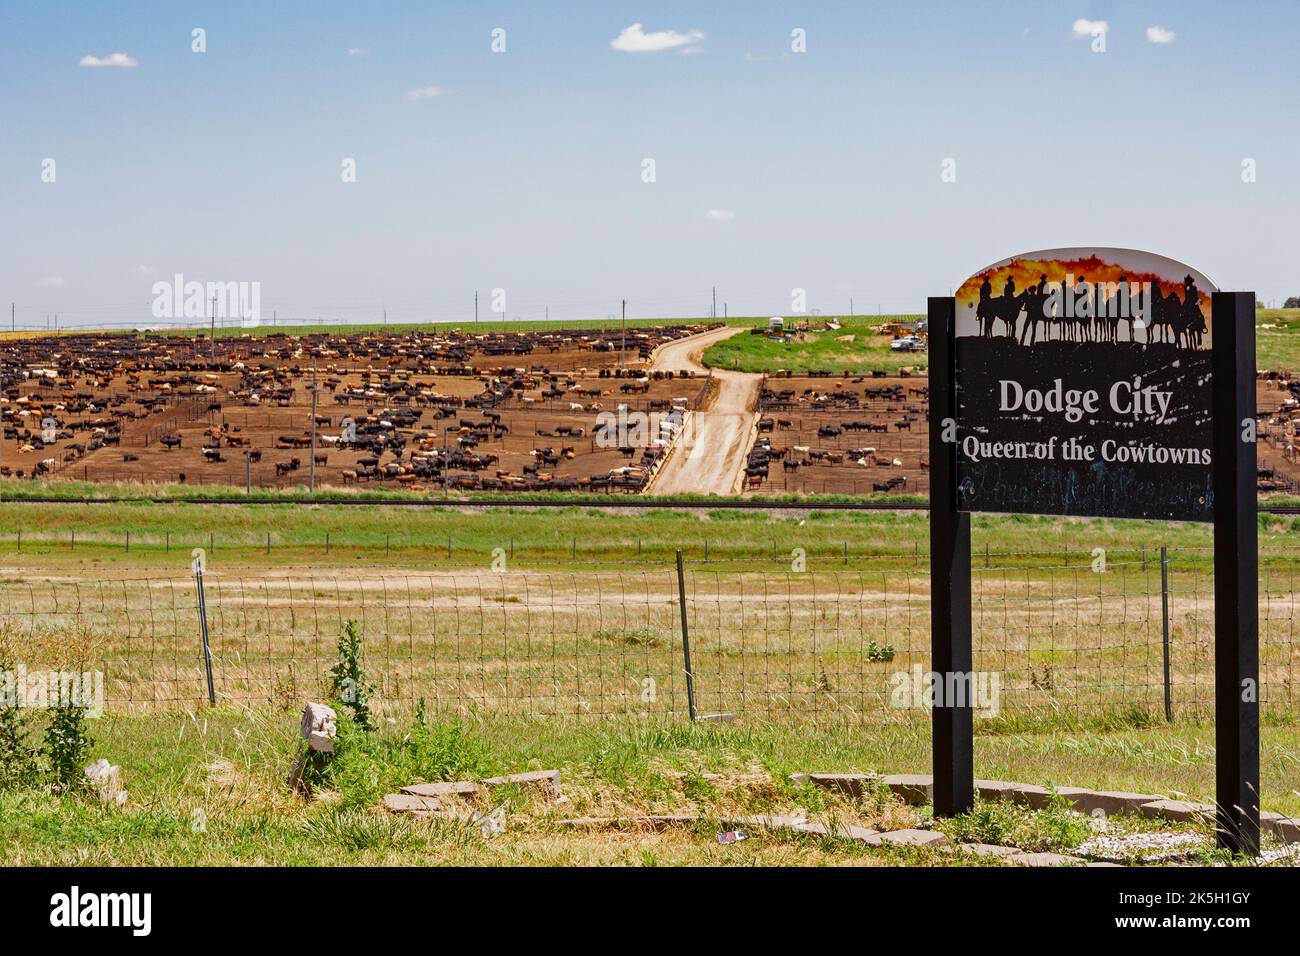 Dodge City, Kansas - A highway scenic overlook at a cattle feedlot on the edge of Dodge City. Stock Photo